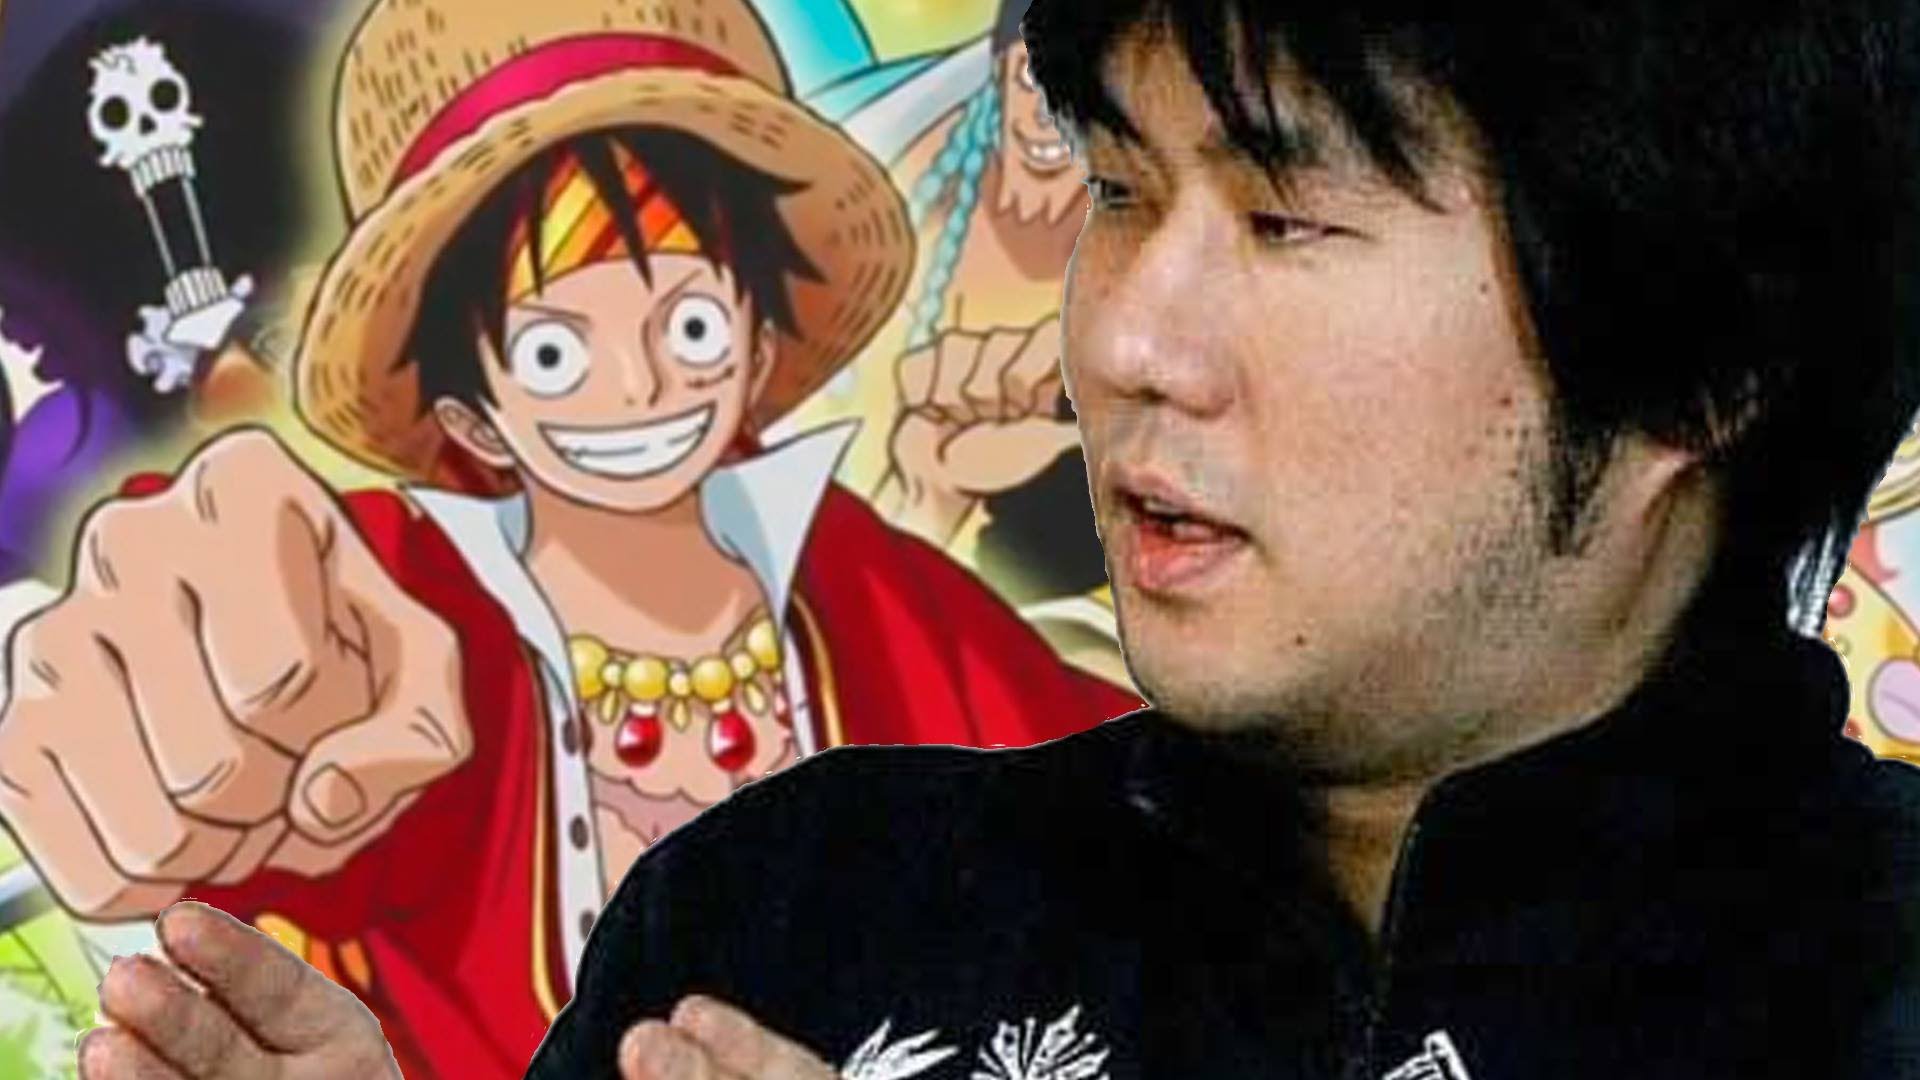 The Art of Storytelling: How Eiichiro Oda Crafted the World of One Piece